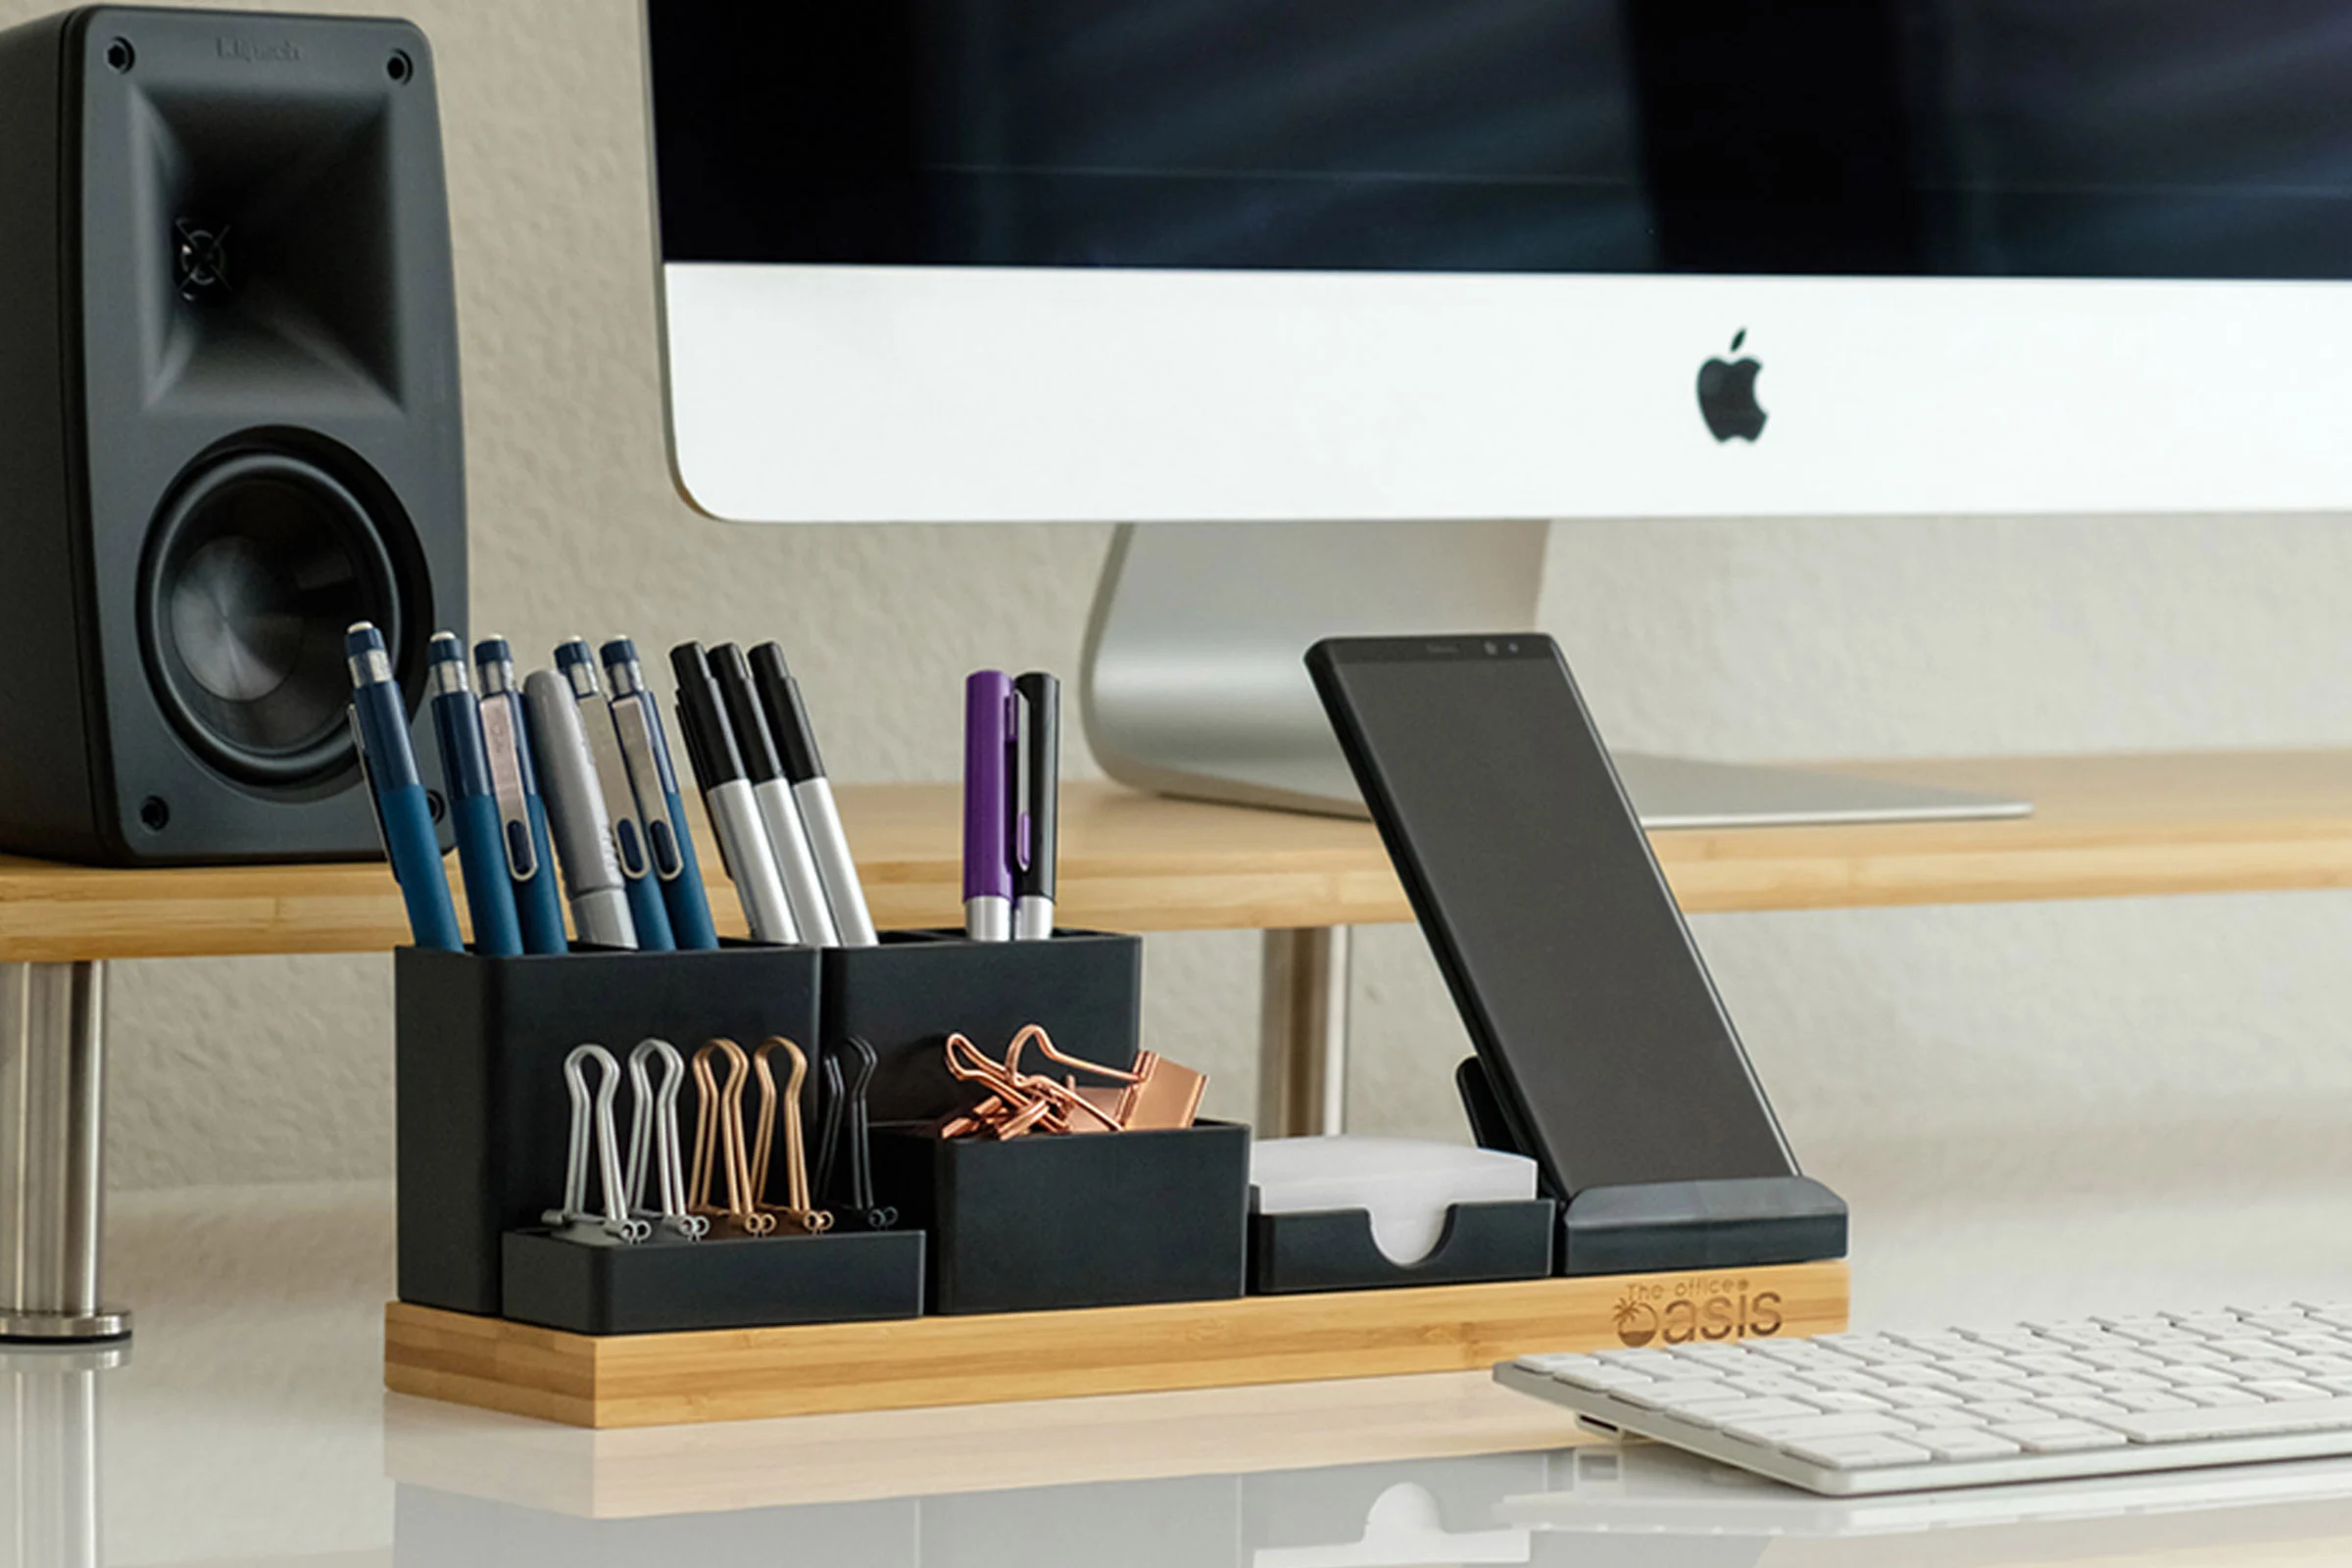 The Office Oasis Magnetic Desk Organizer